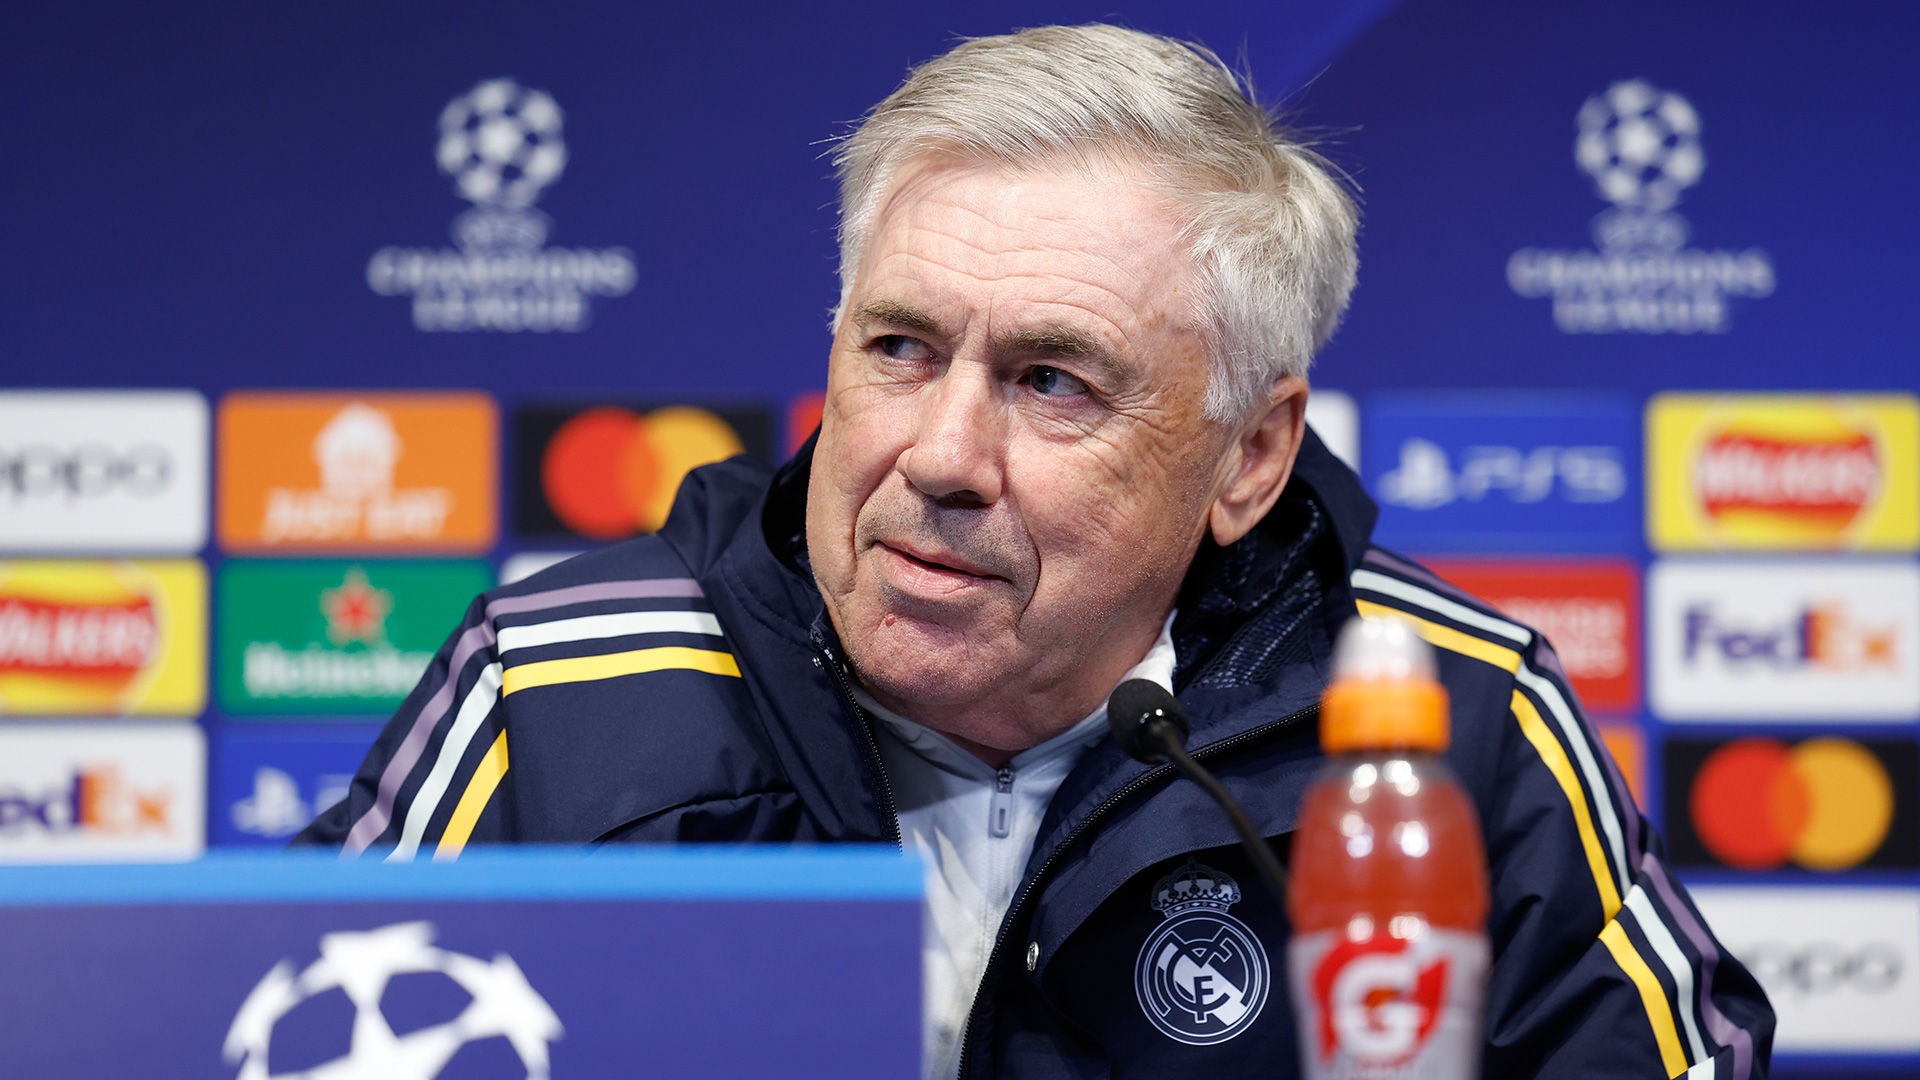 Ancelotti: "It'll be a spectacular and highly entertaining match"